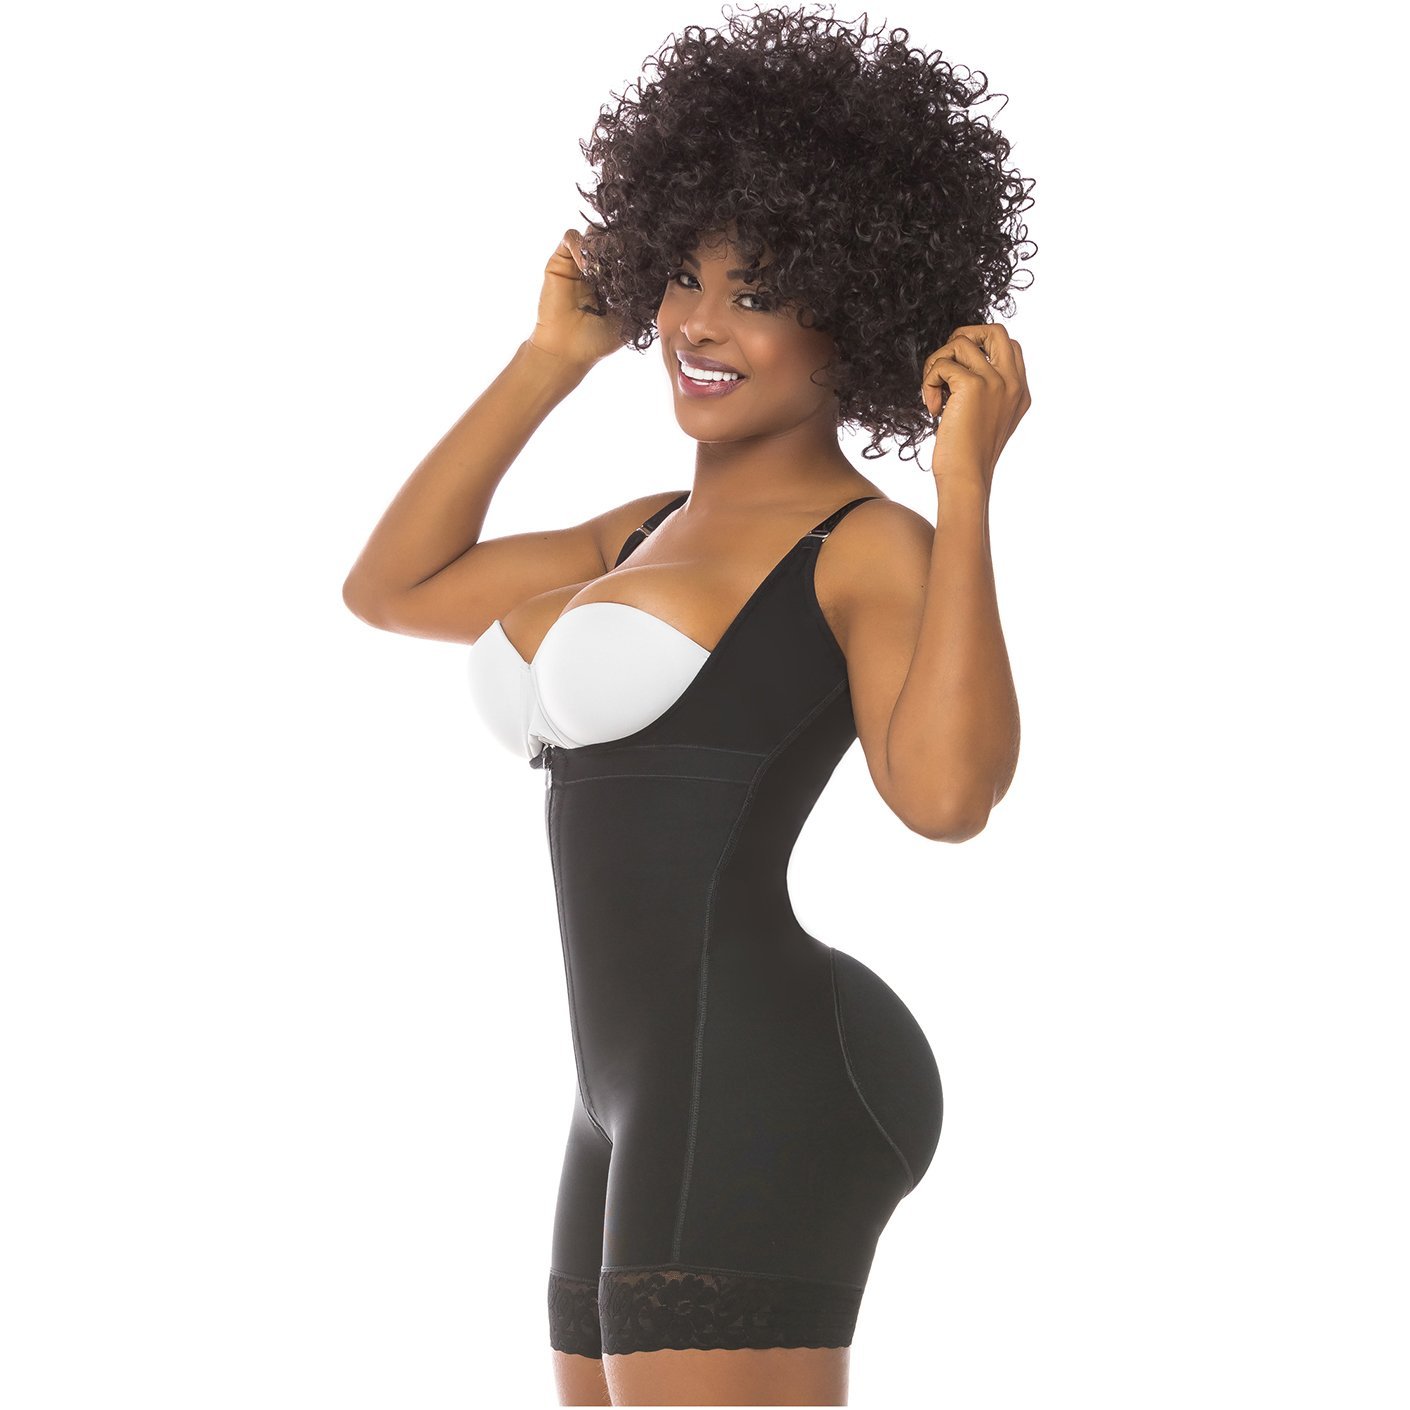 FAJAS SALOME 216 Daily Use Strapless Butt Lifter Shapewear for Dress - New England Supplier